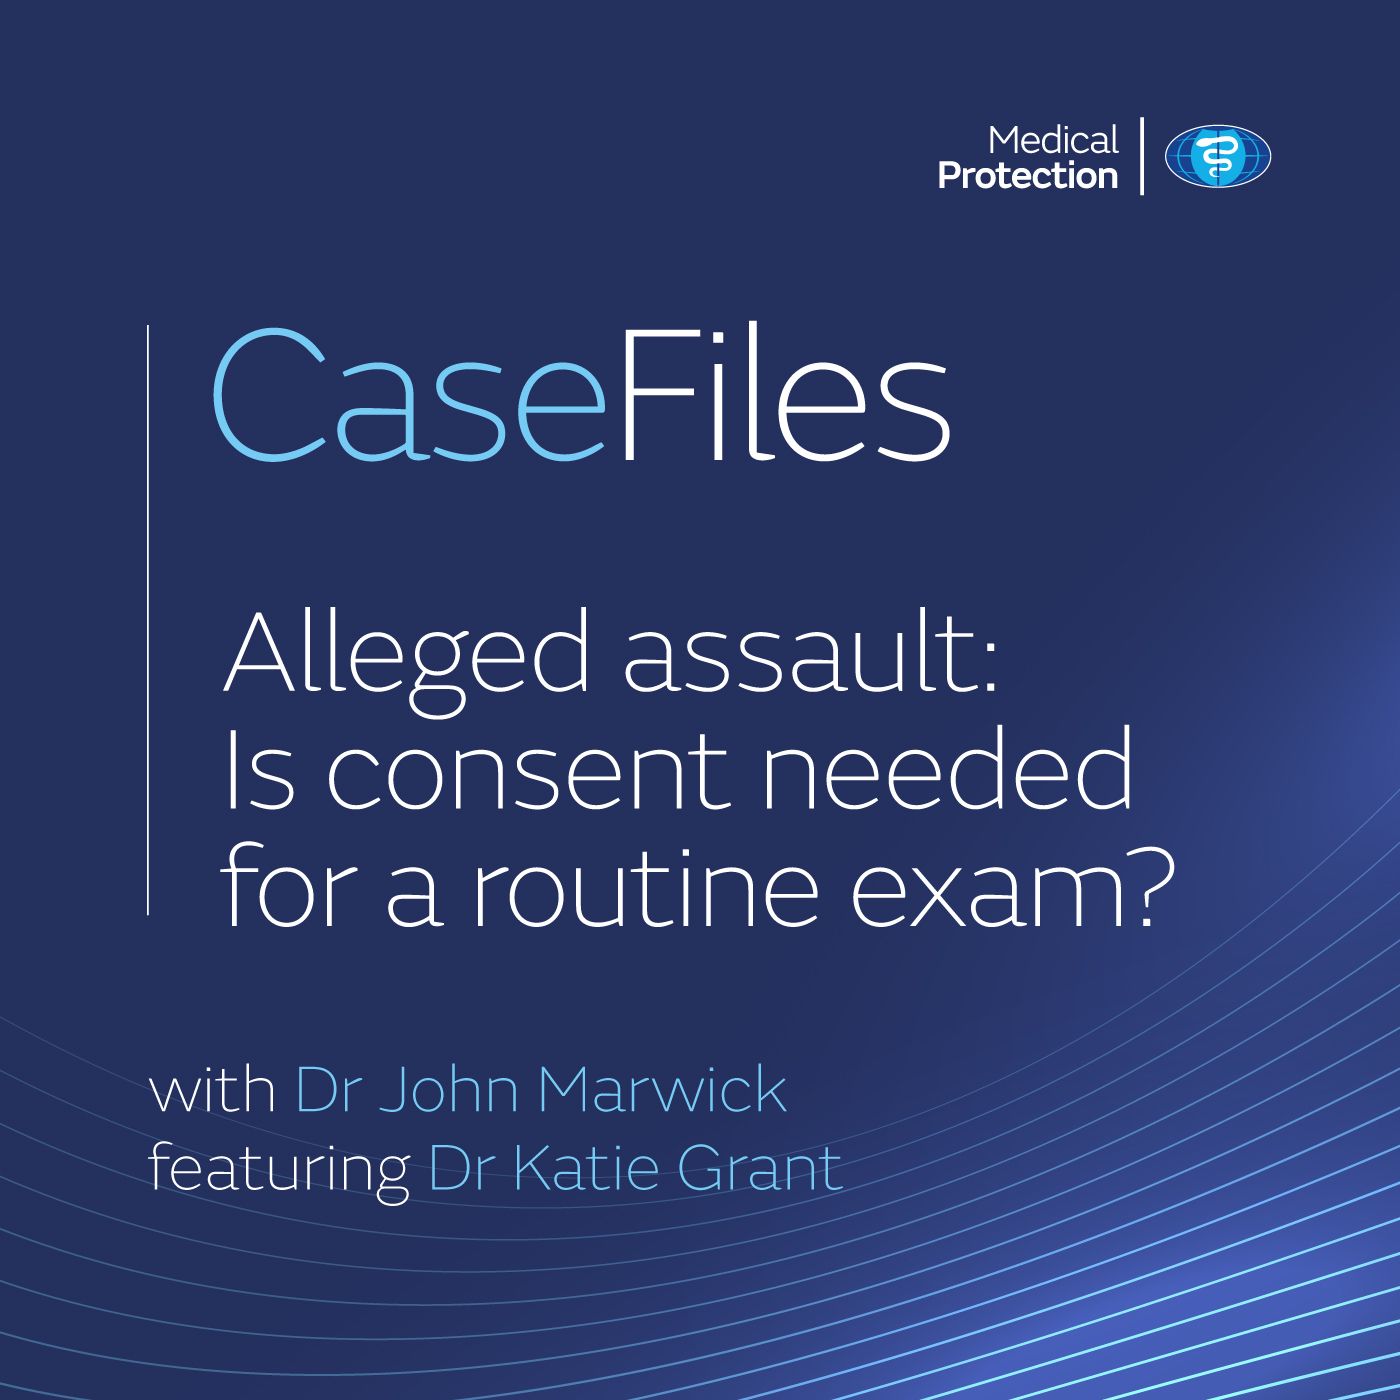 Alleged assault: Is consent needed for a routine exam?